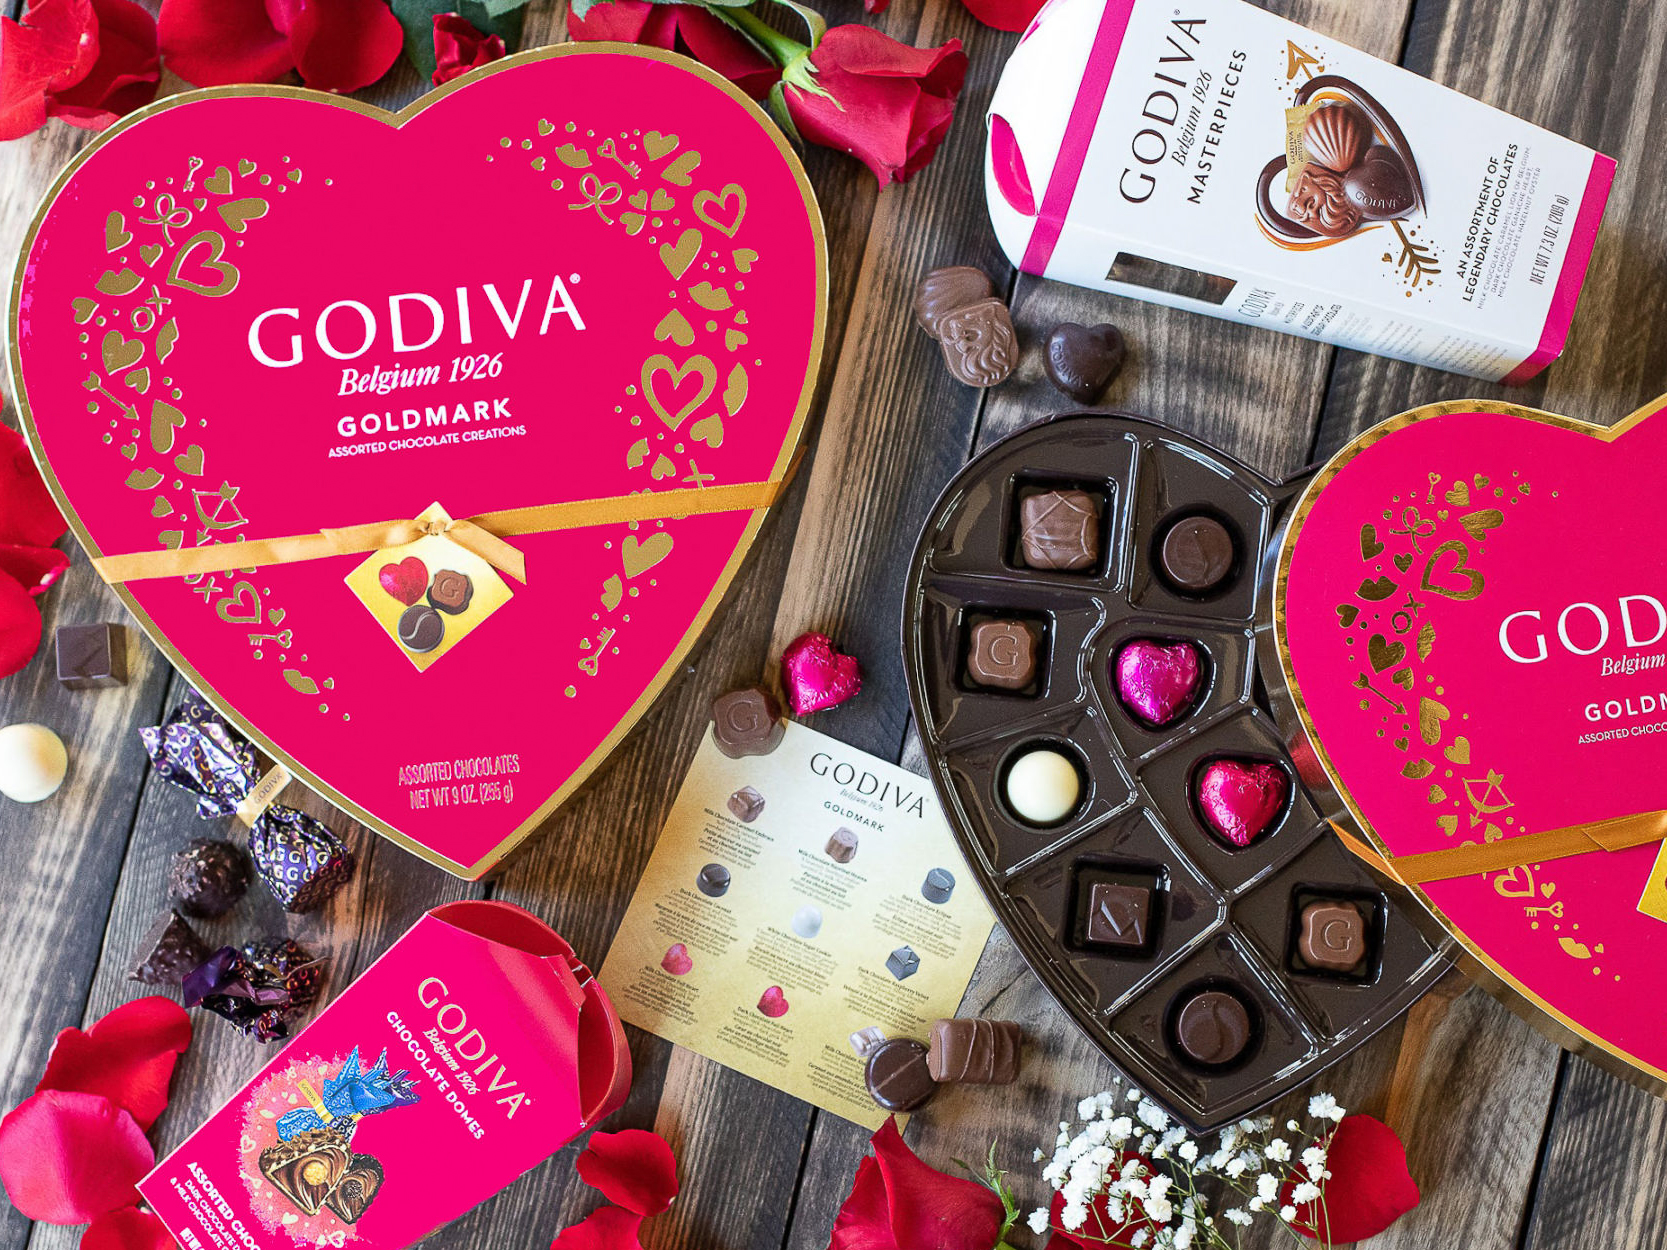 GODIVA® Valentine's Day Chocolate Makes The Perfect Gift - Available At Publix on I Heart Publix